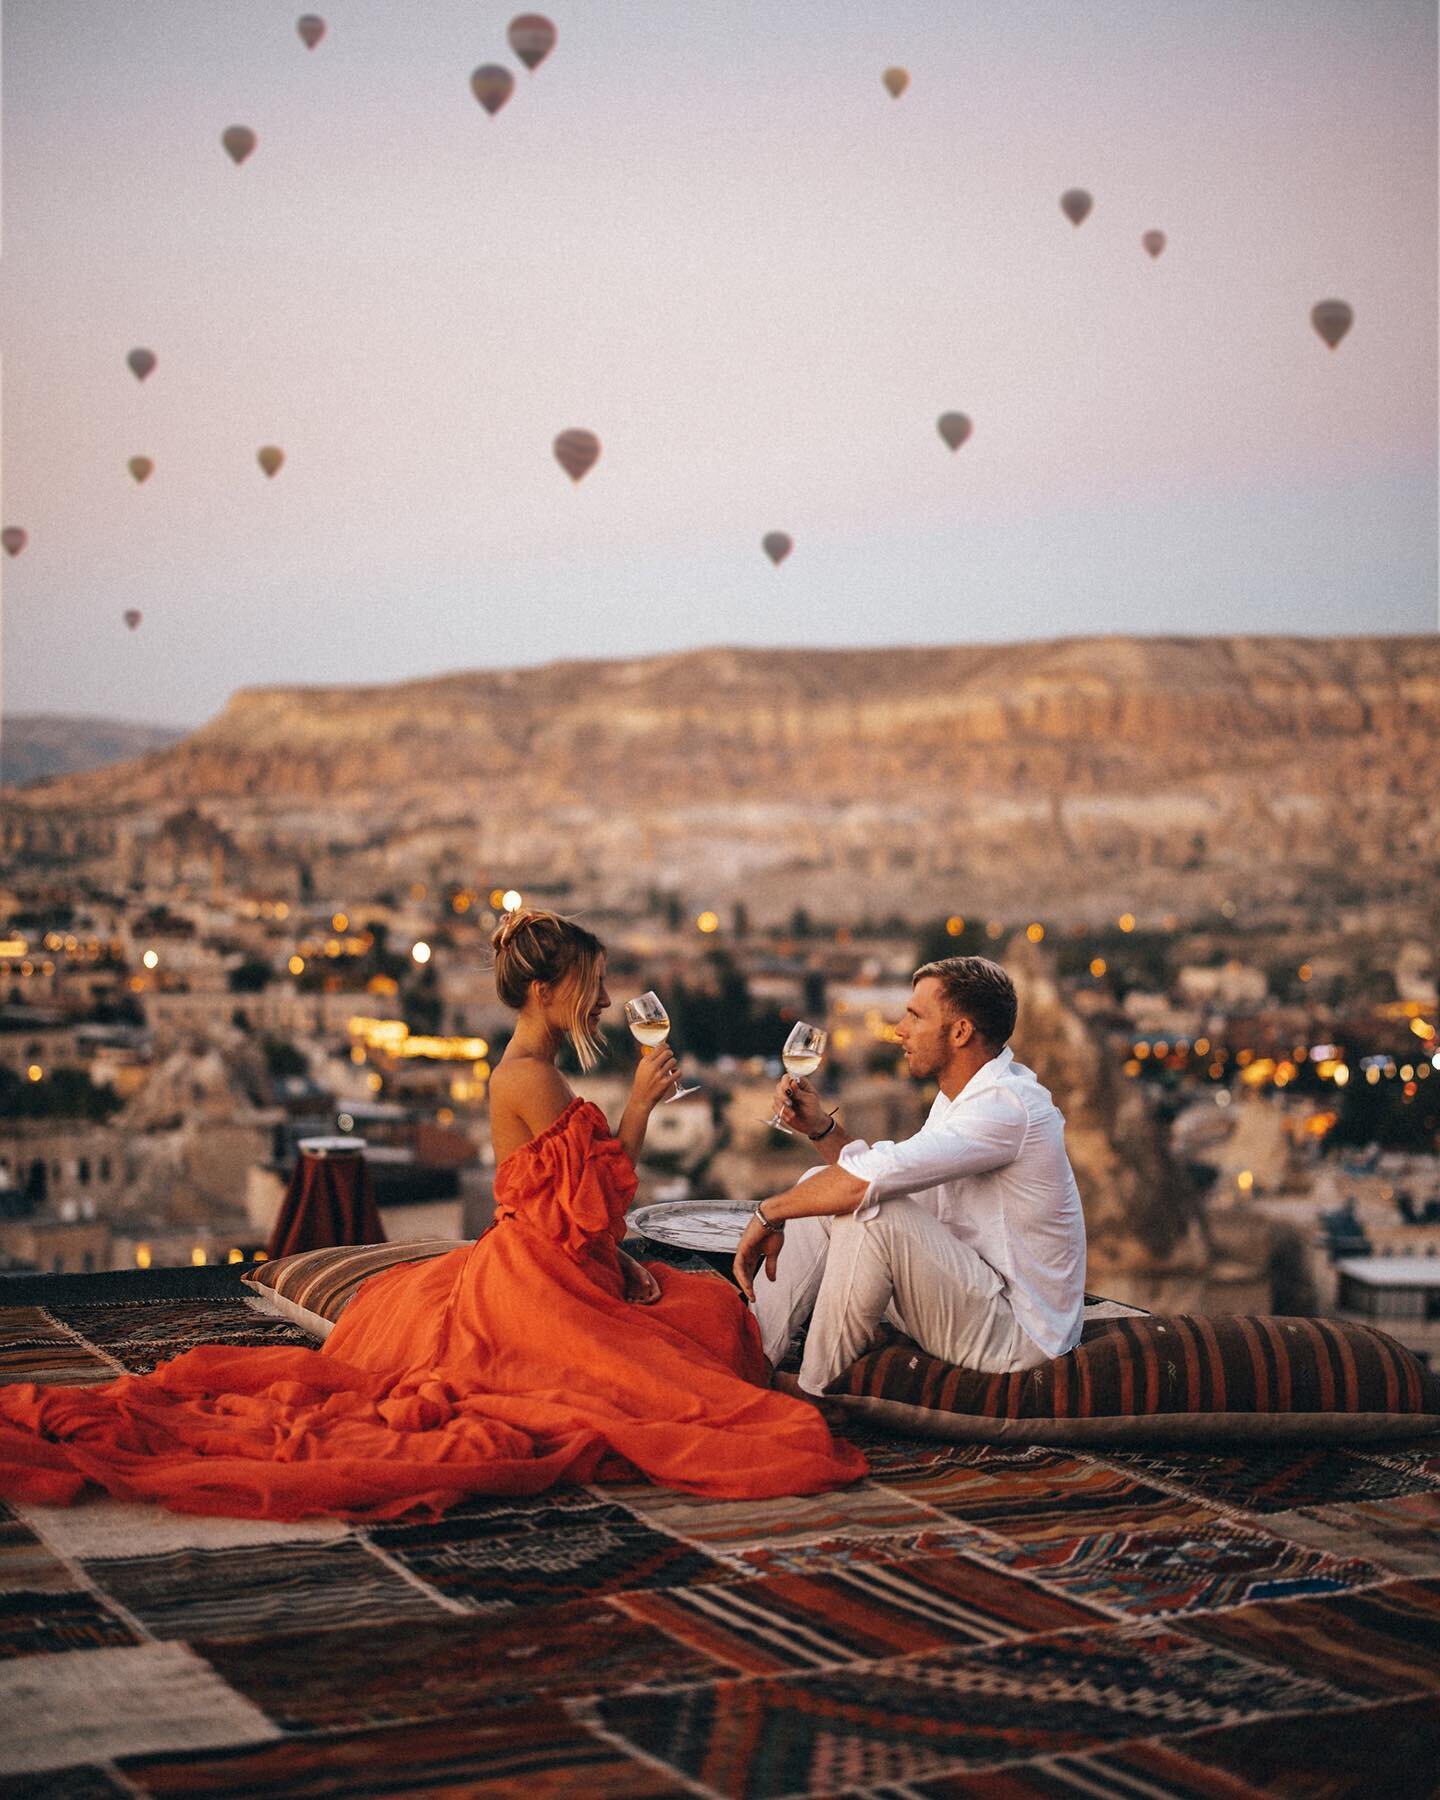 Dreaming about Cappadocia.. Where I can hang on rooftops with this beautiful girl and then jump into a sky filled with hot air balloons 🇹🇷